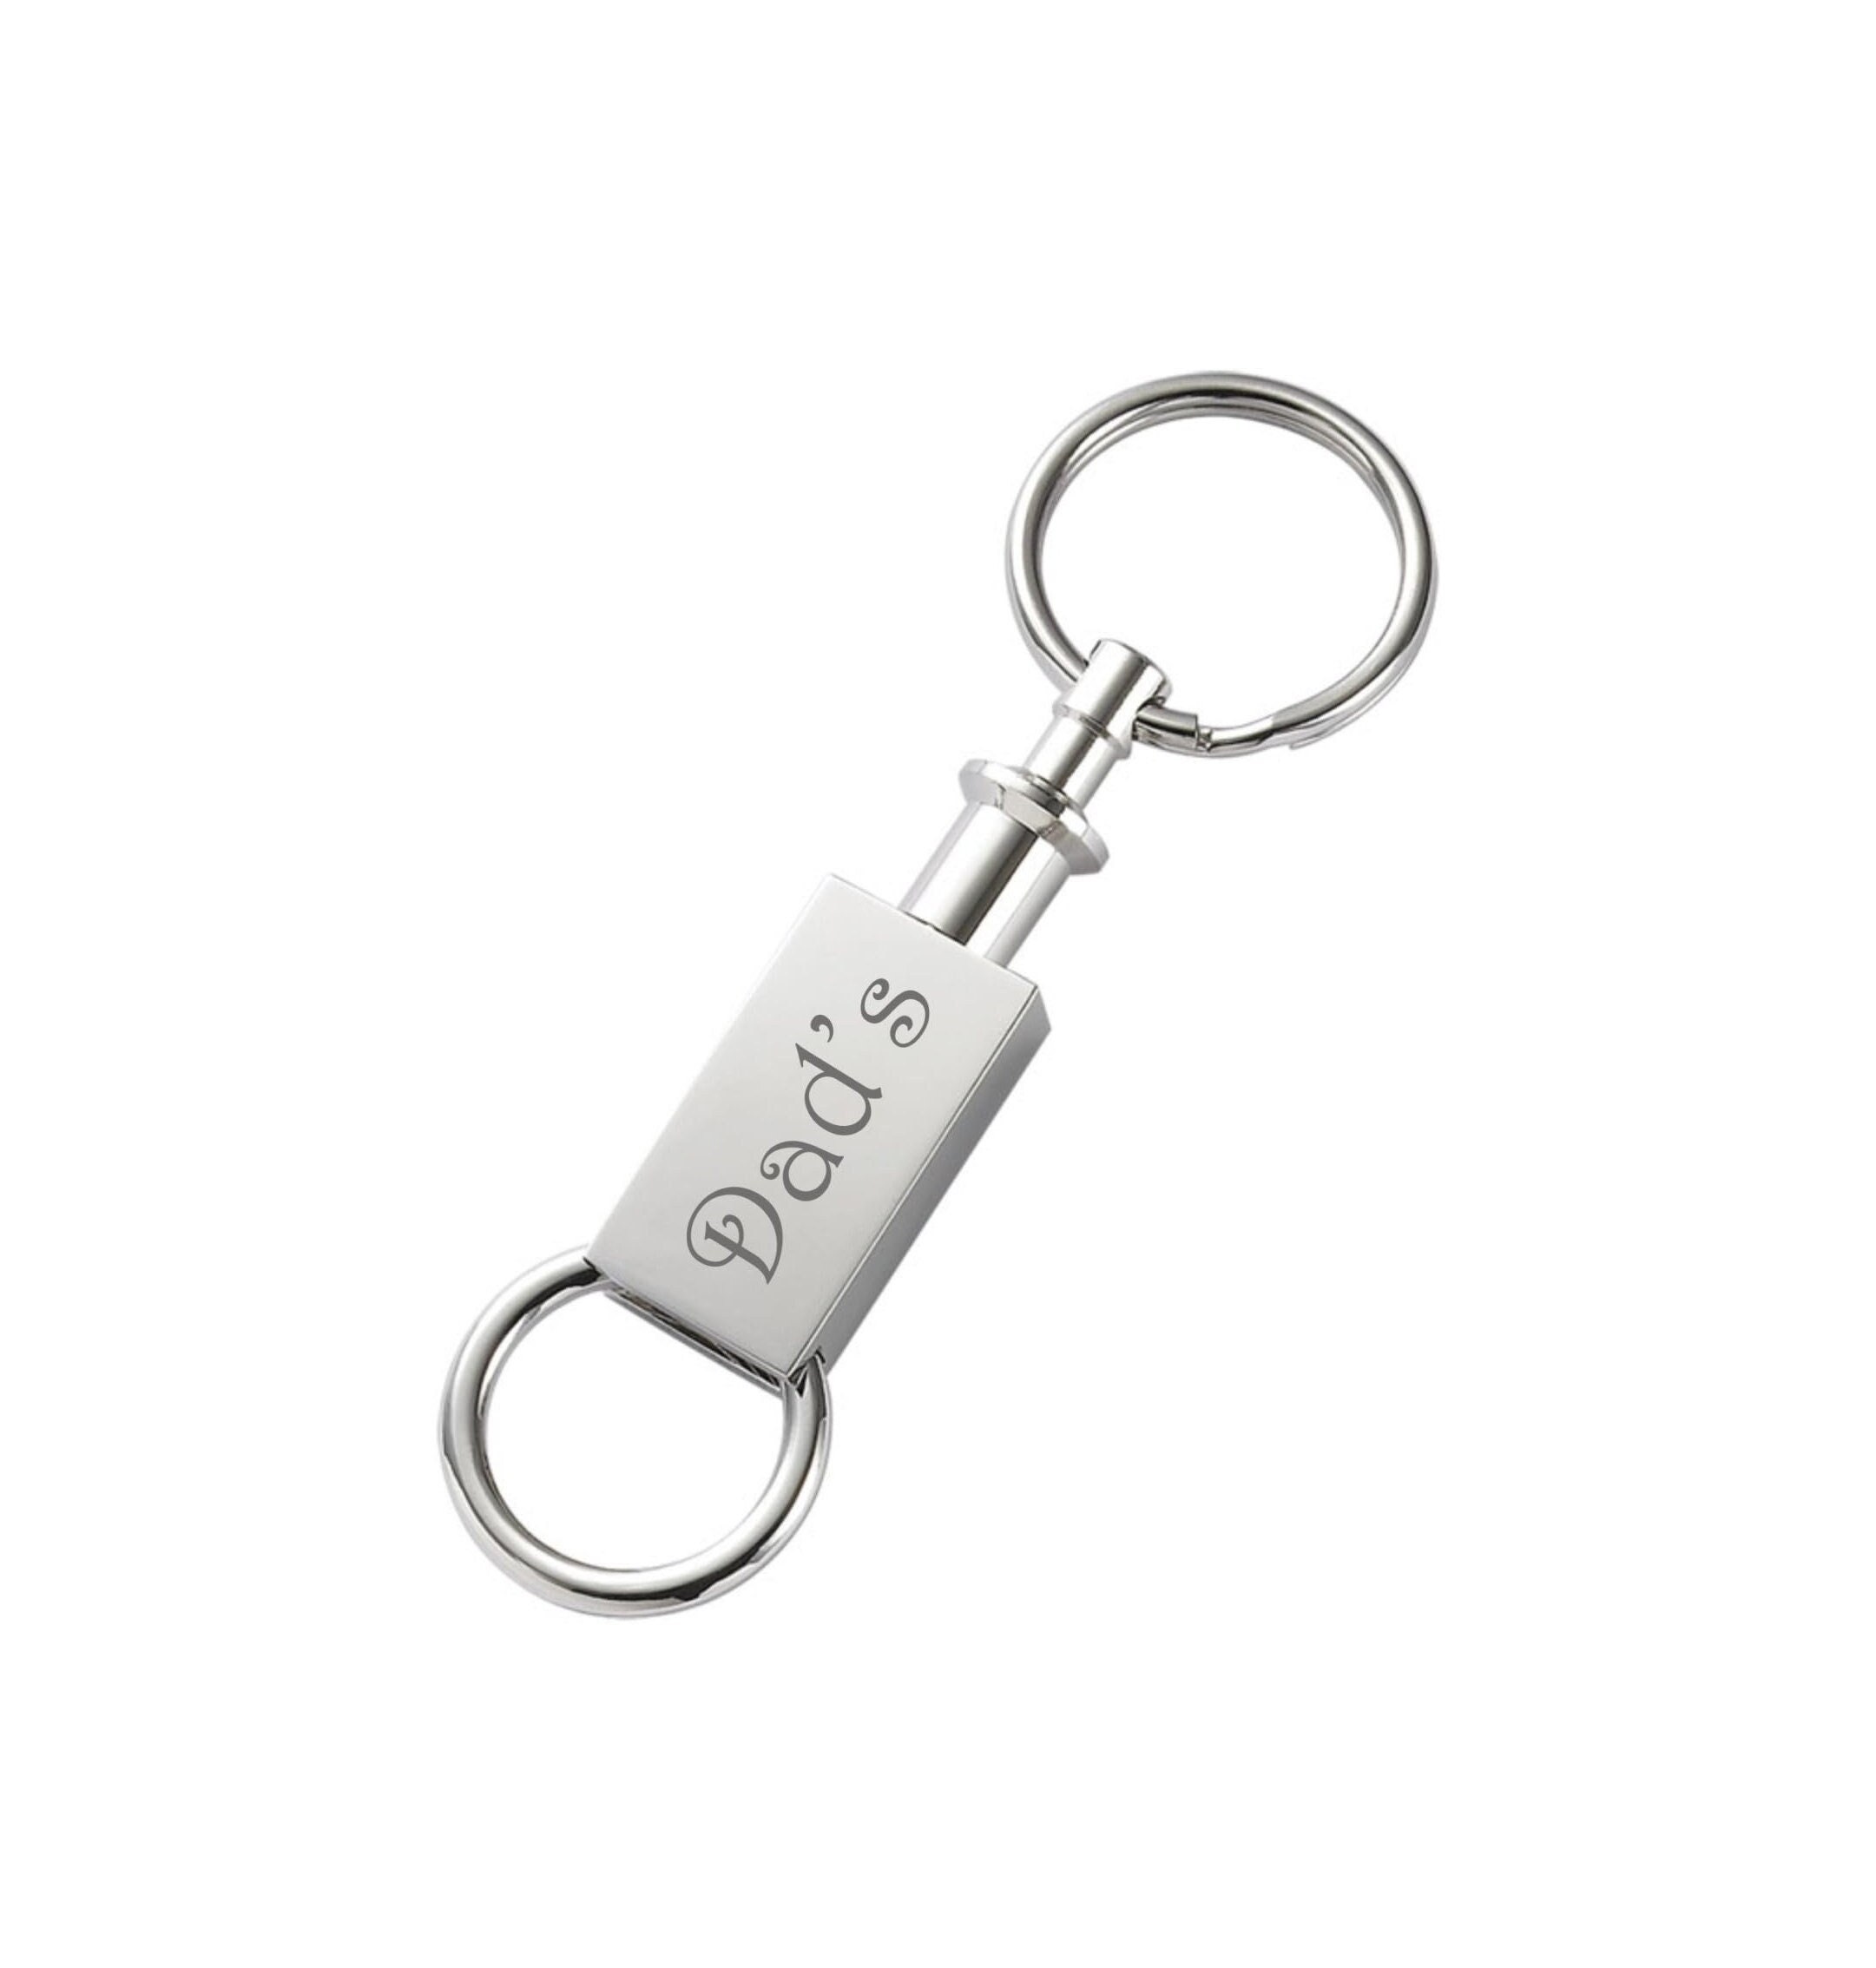 Retractable Badge Holder Key Chain With Keychain Ring Clip Metal